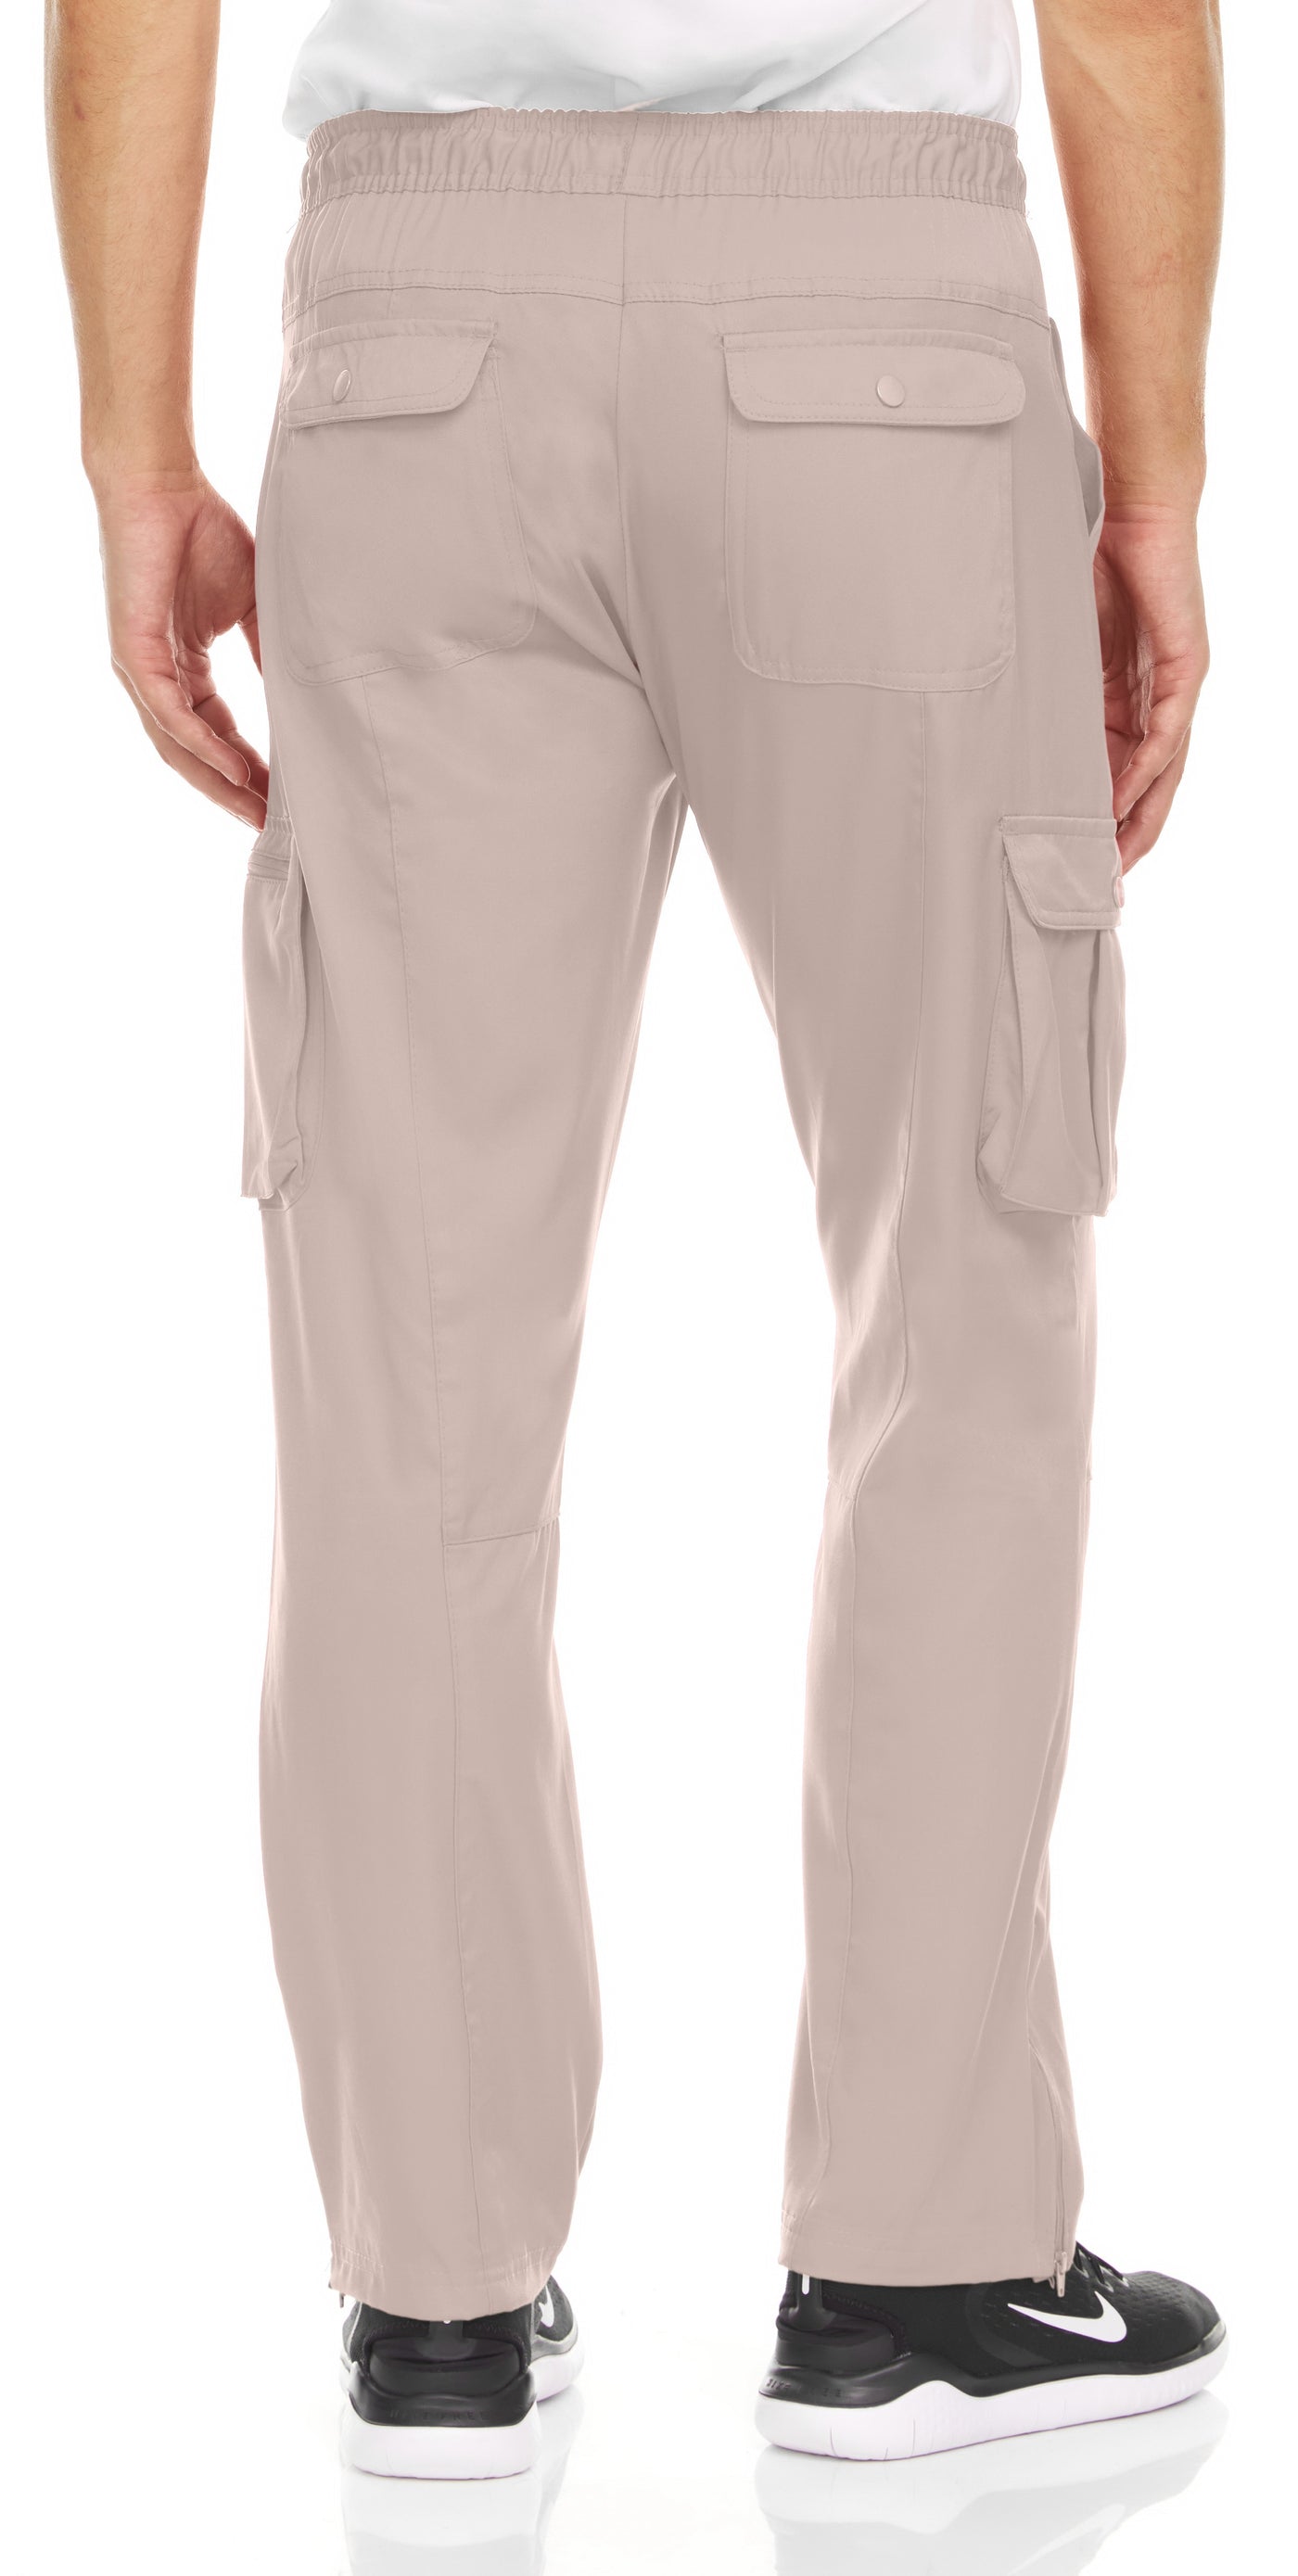 Noah - Tapered Fit Cargo Pant By MediChic XS-3X / Khaki